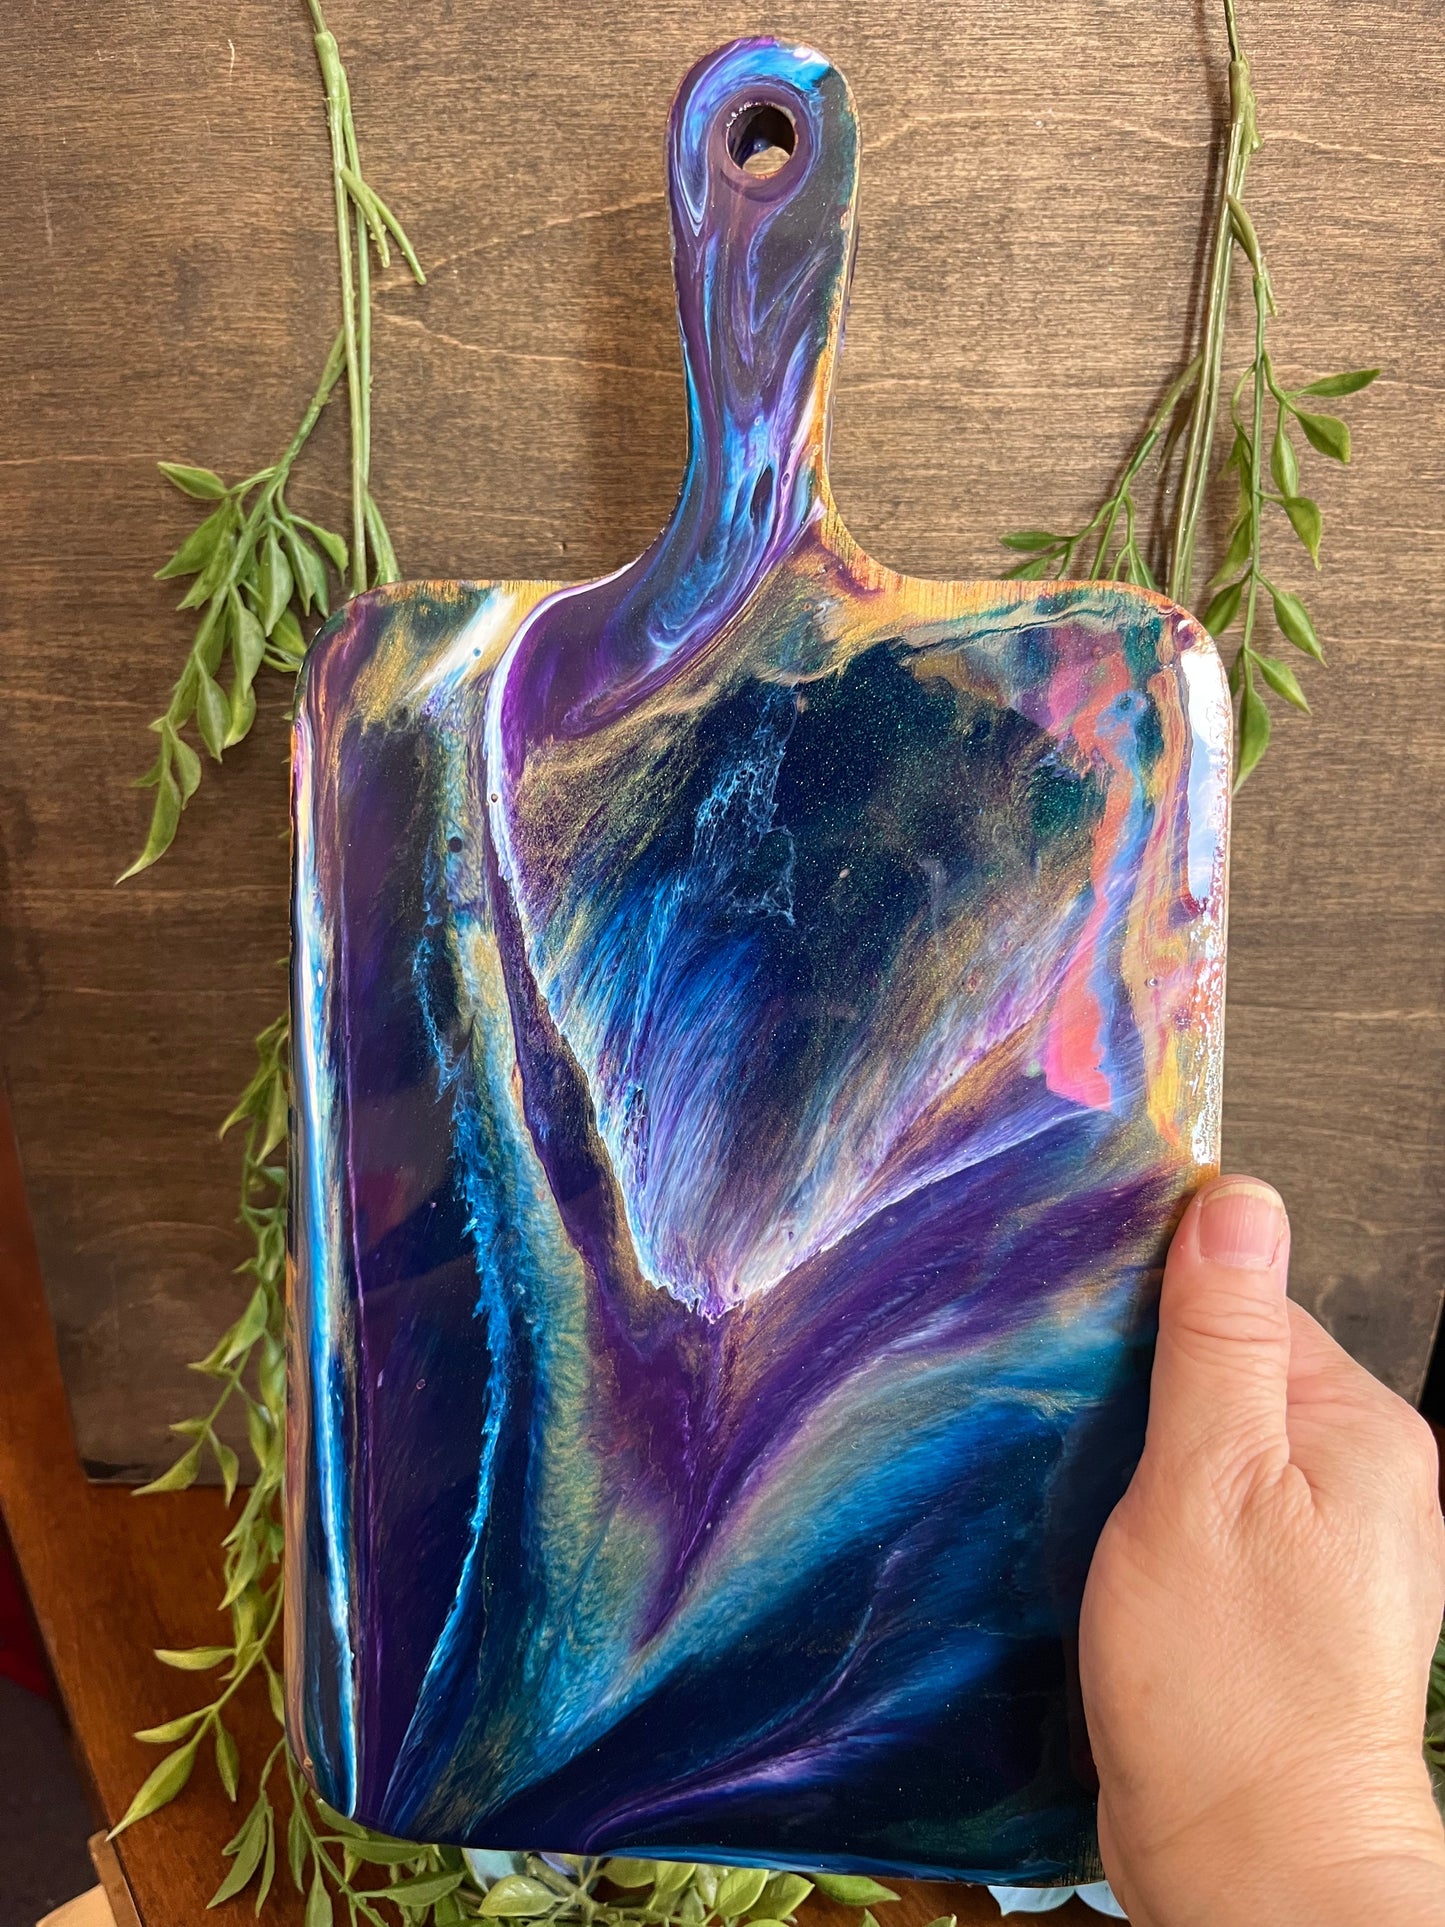 Resin Class - Personal size Cutting board - 10/25 @ 6pm